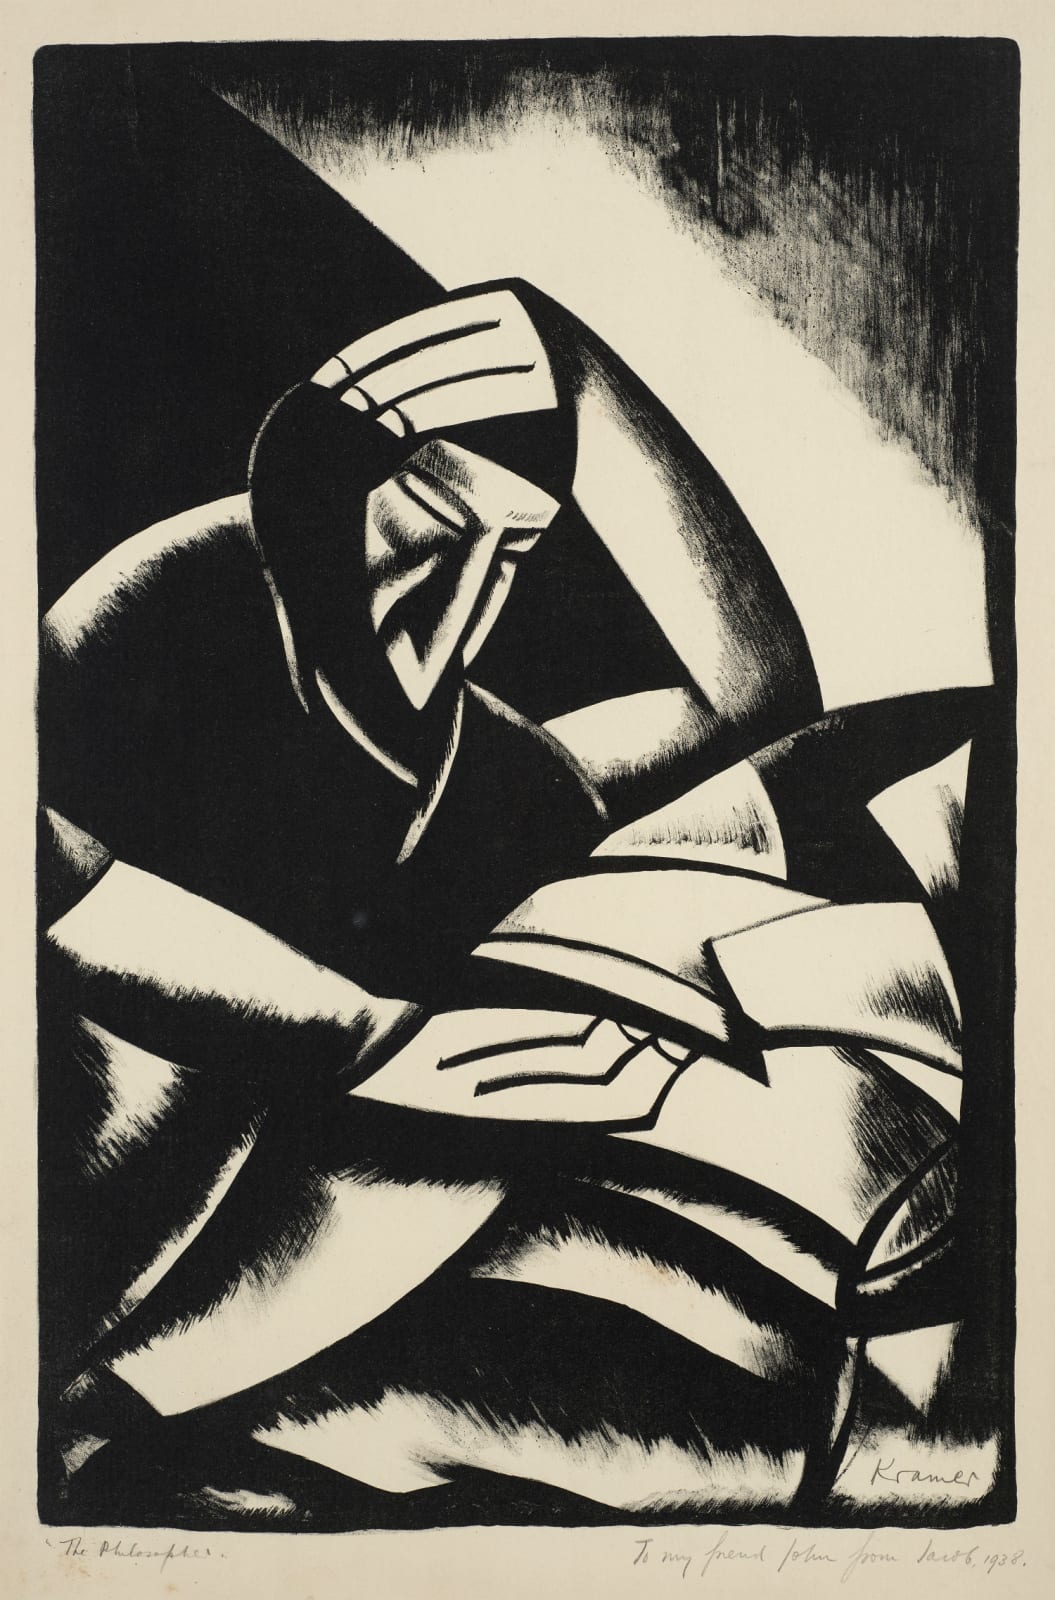 Jacob Kramer (1892-1962) The Philosopher 1922 Lithograph on woven paper 50.3 x 33 cm Ben Uri Collection © The William Roberts Society, London To see and discover more about this artist click here